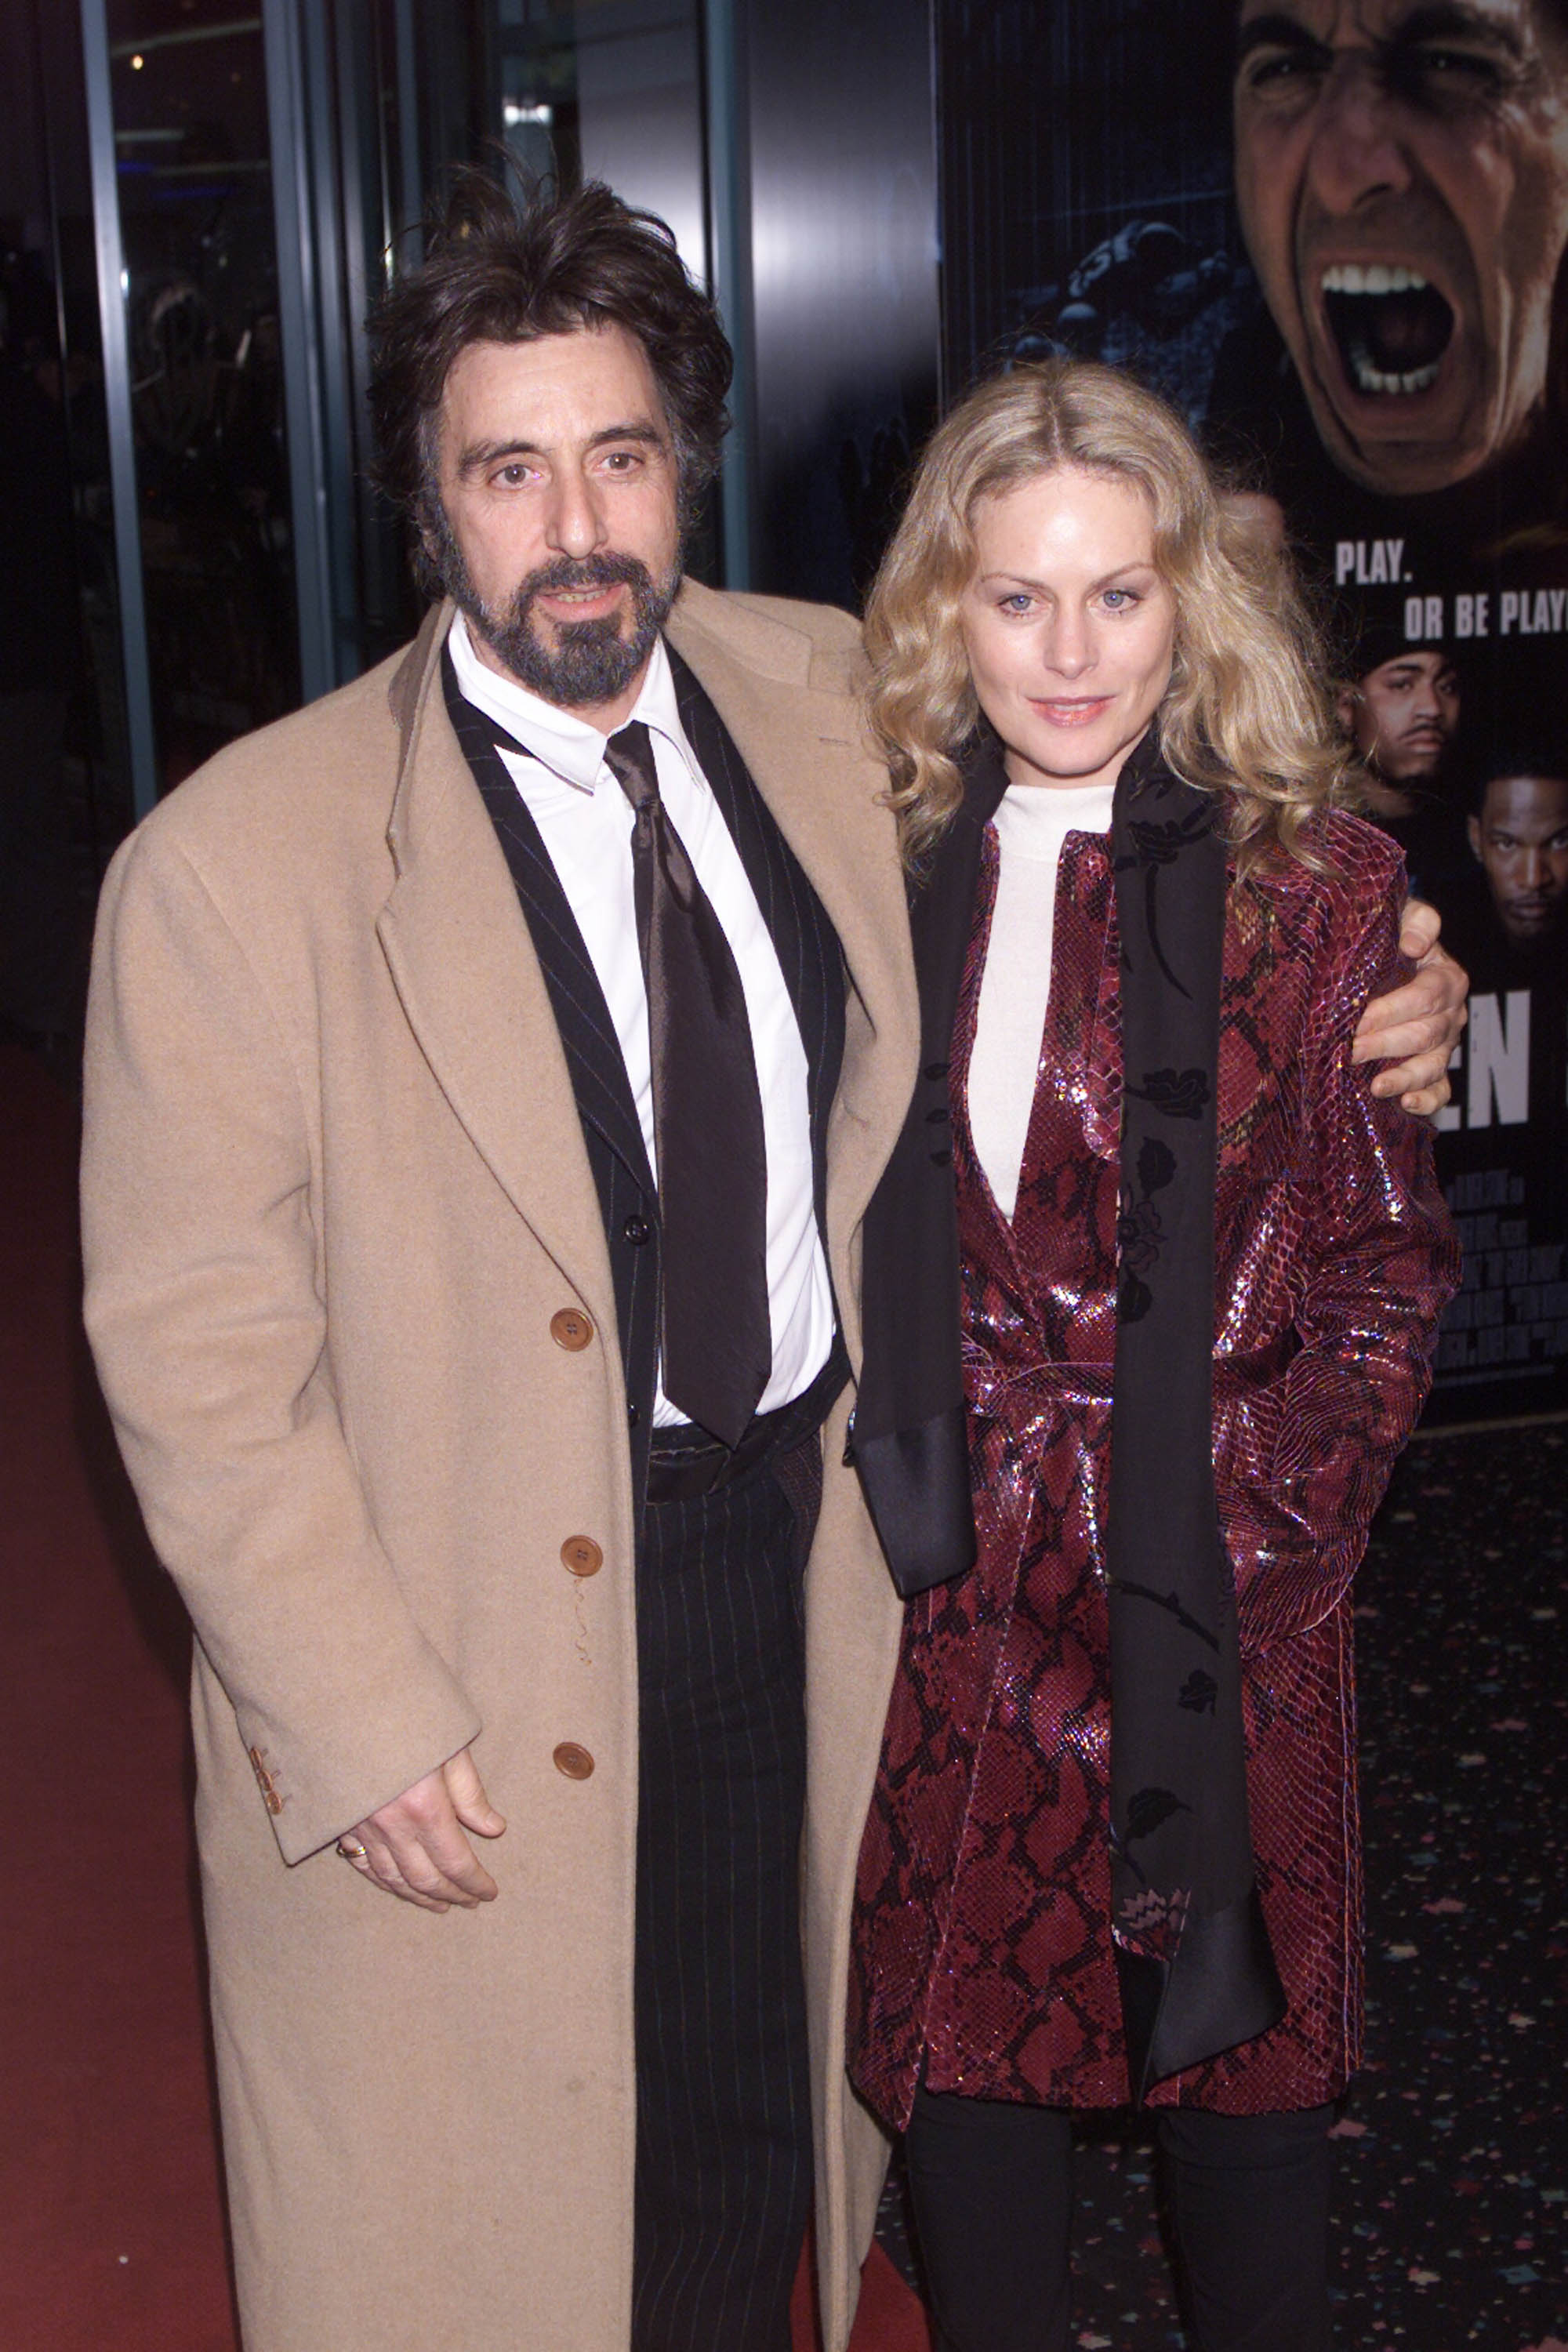 Beverly D'Angelo and Al Pacino at the premiere of "Any Given Sunday" in 2000 | Source: Getty Images